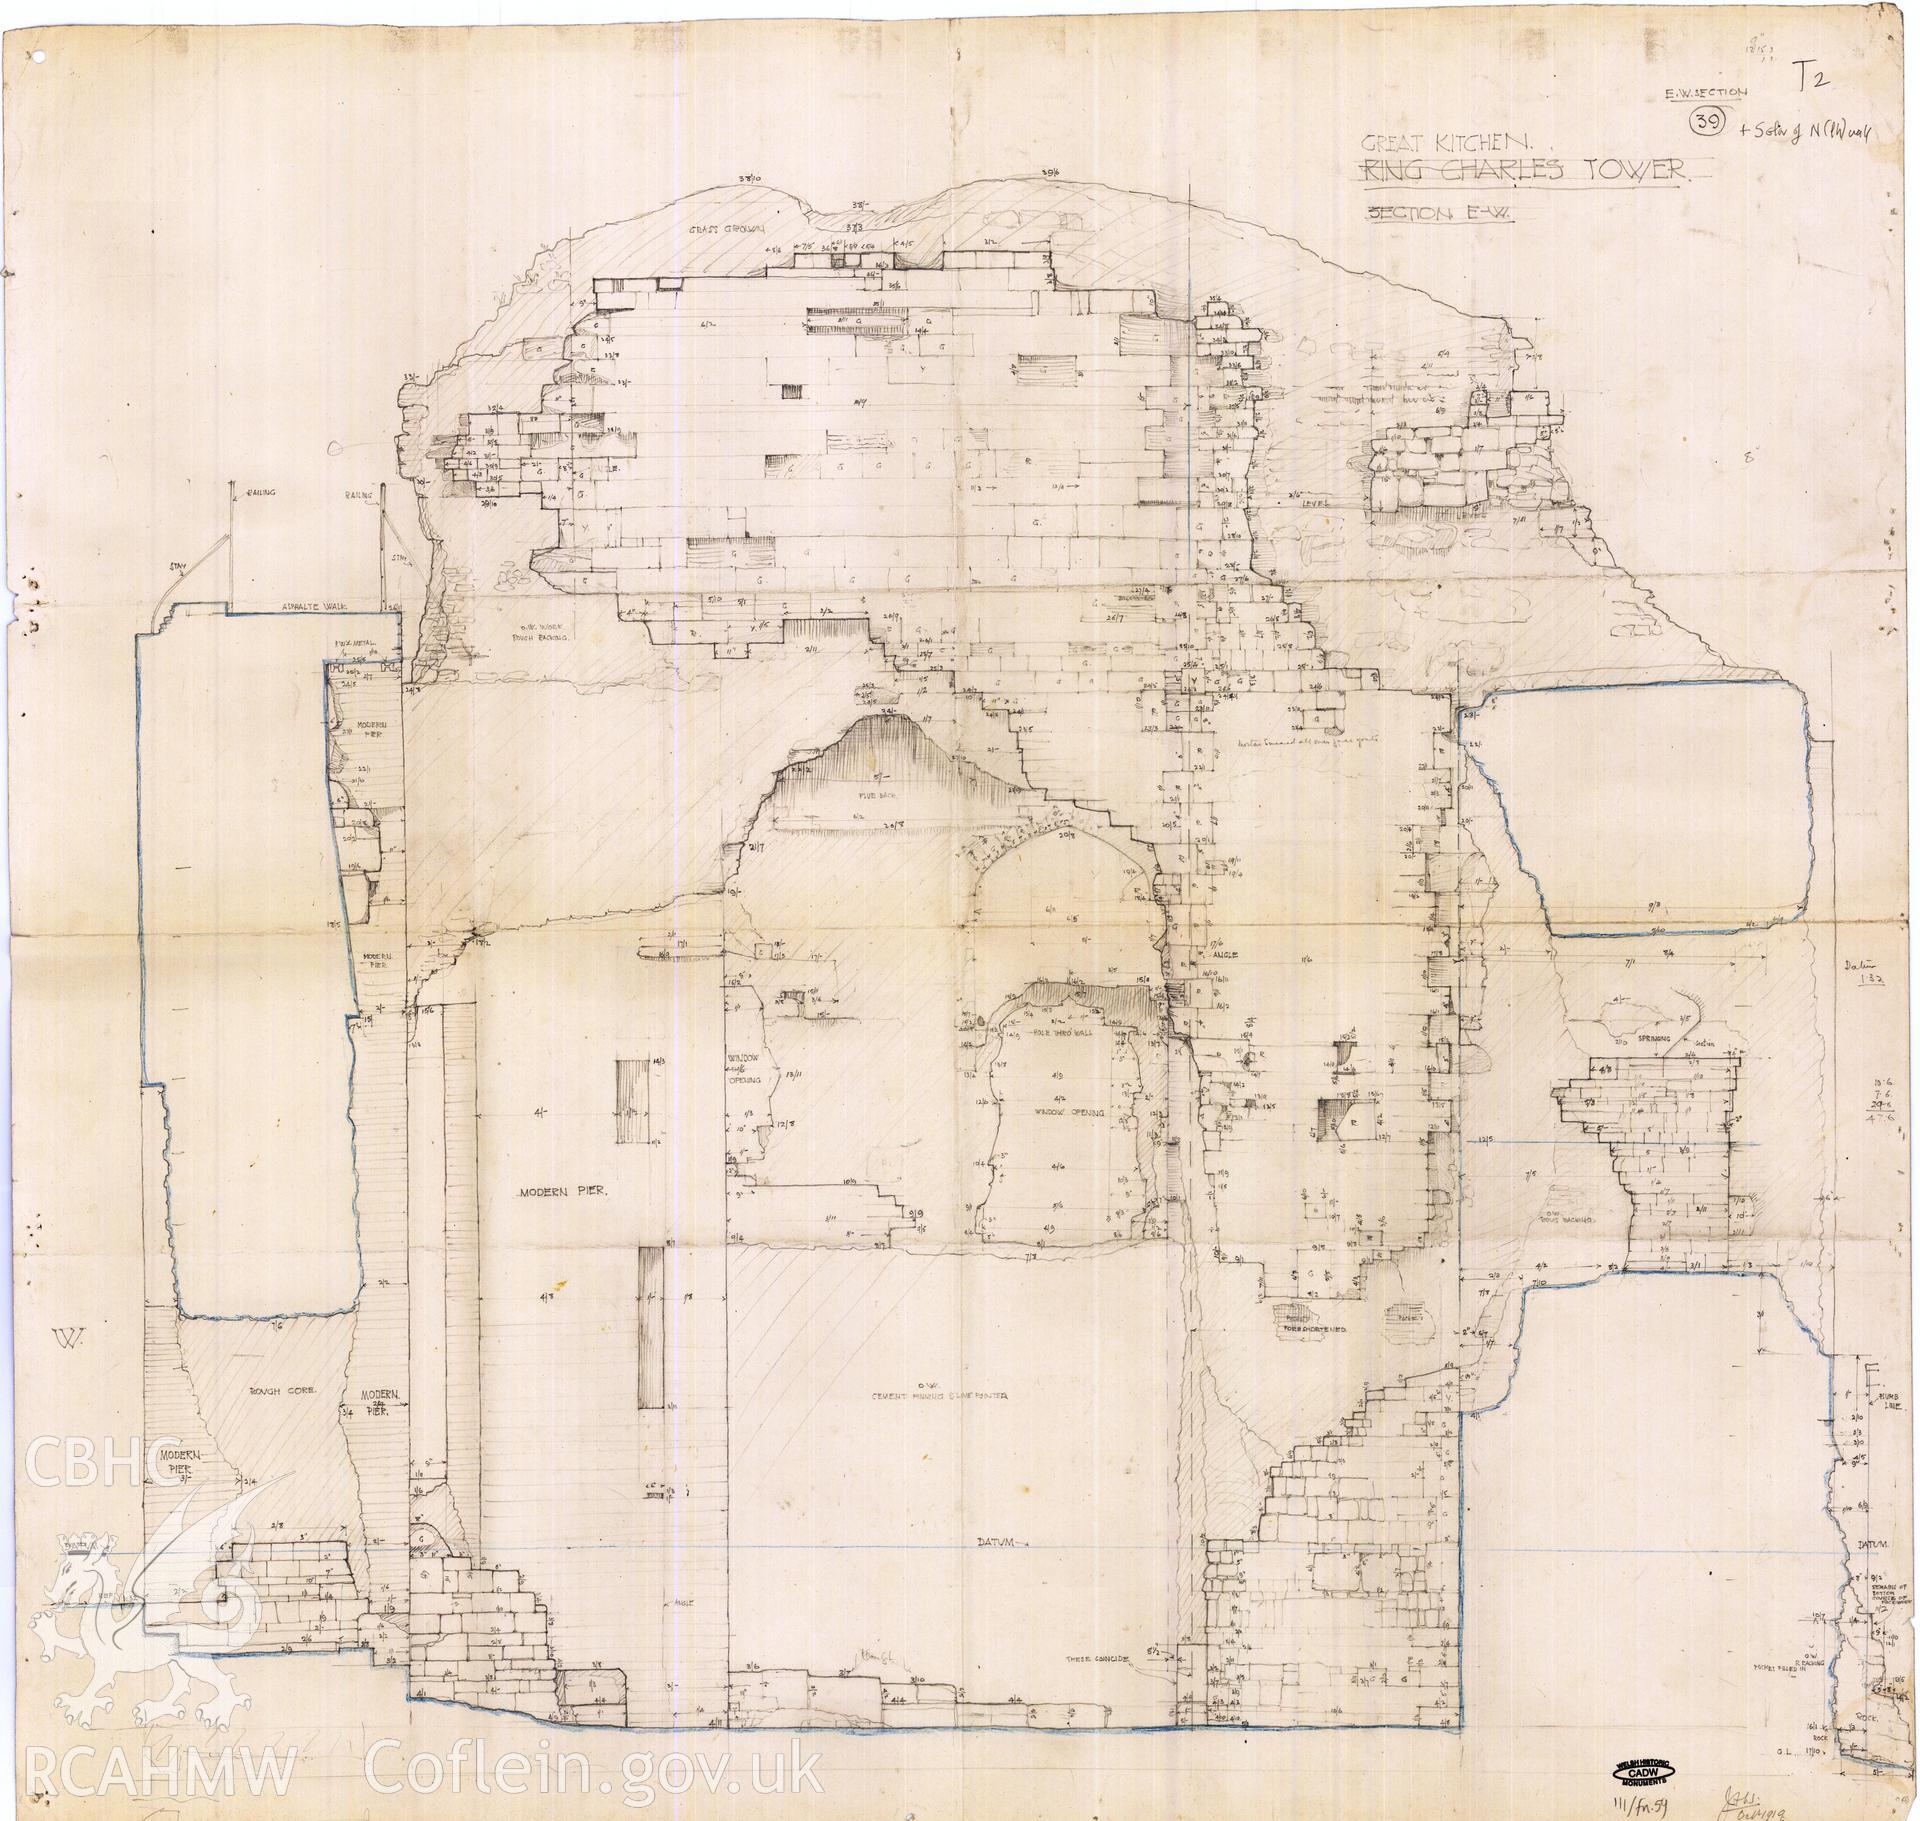 Cadw guardianship monument drawing of Denbigh Castle. T2, int elevation of N (l-h) wall. Cadw Ref. No:111/fn.59. No scale.